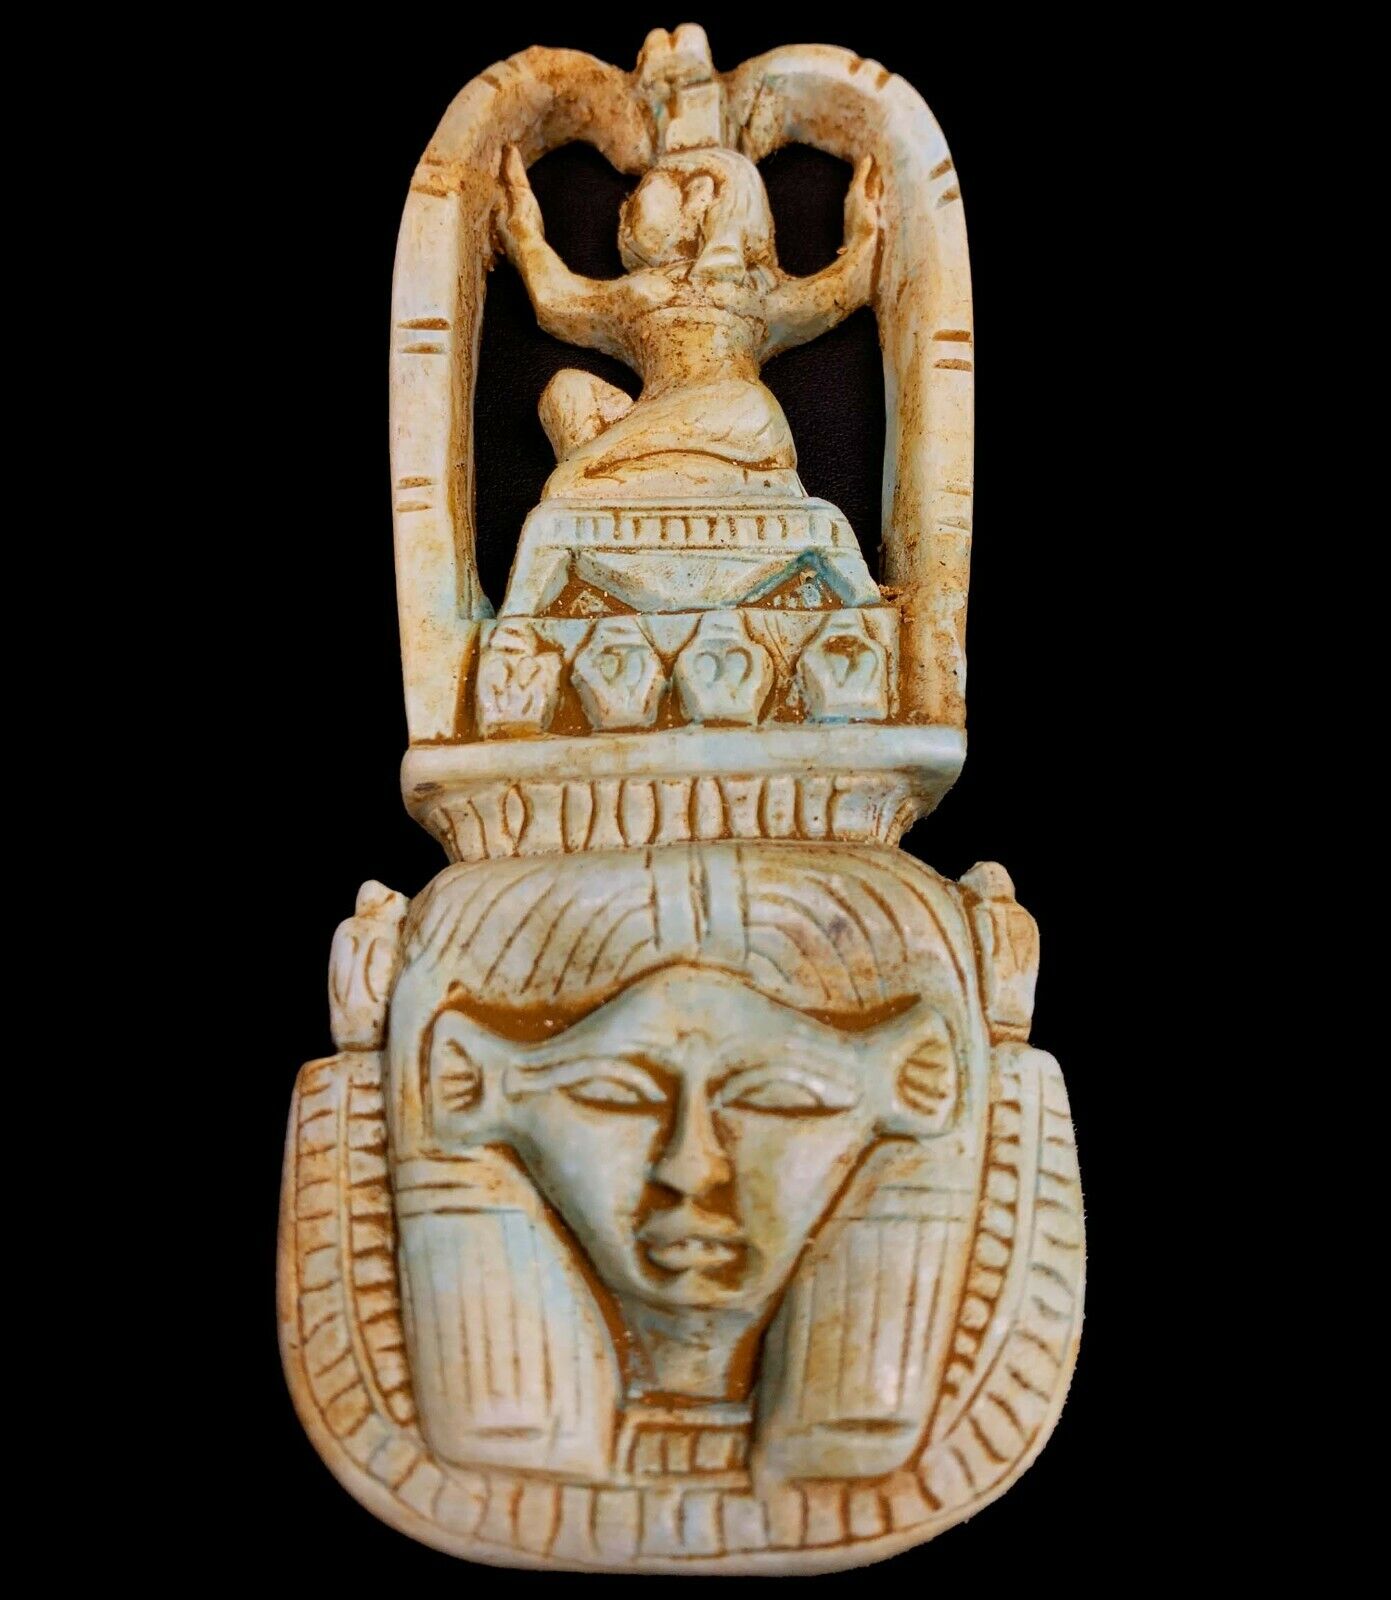 Real Face of The Egyptian Hathor goddess of the sky & fertility and Love